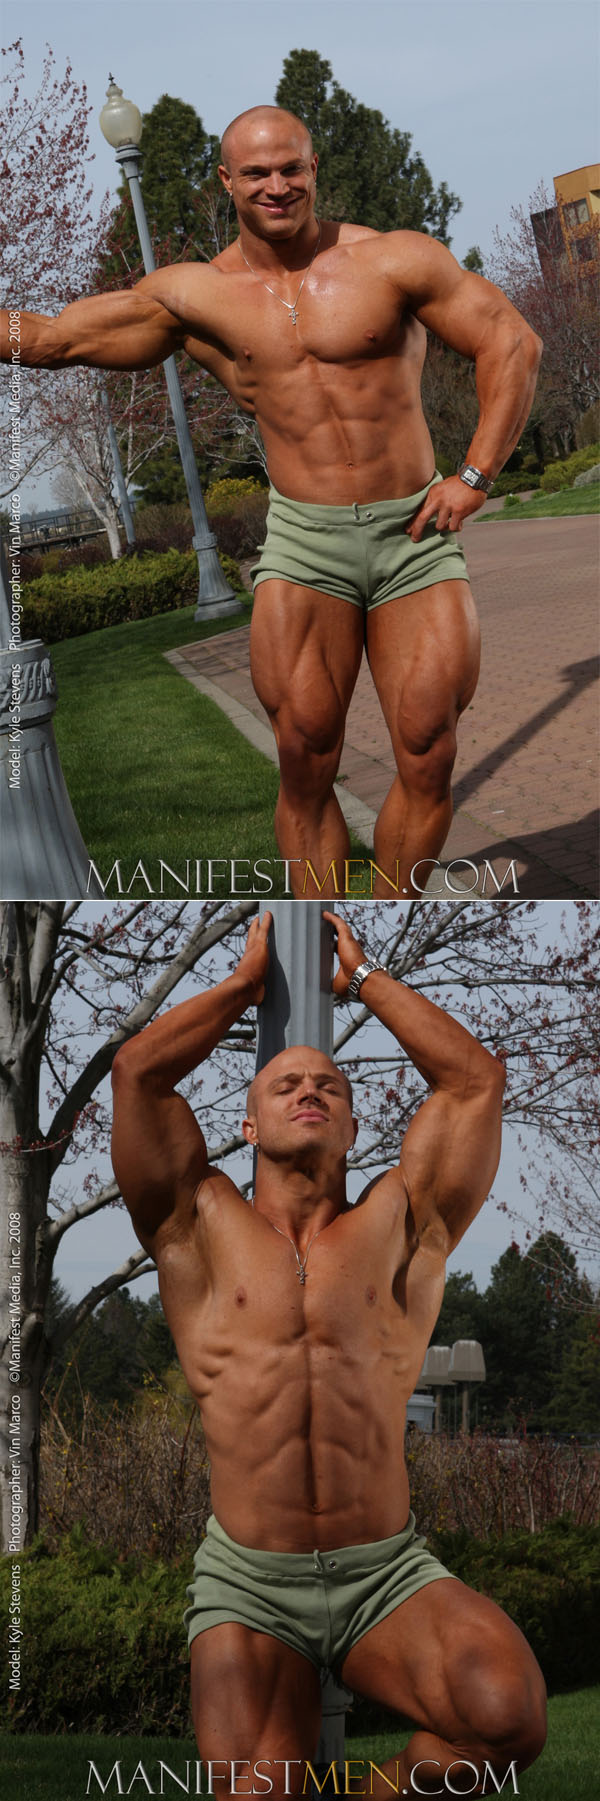 Muscle posing outdoors